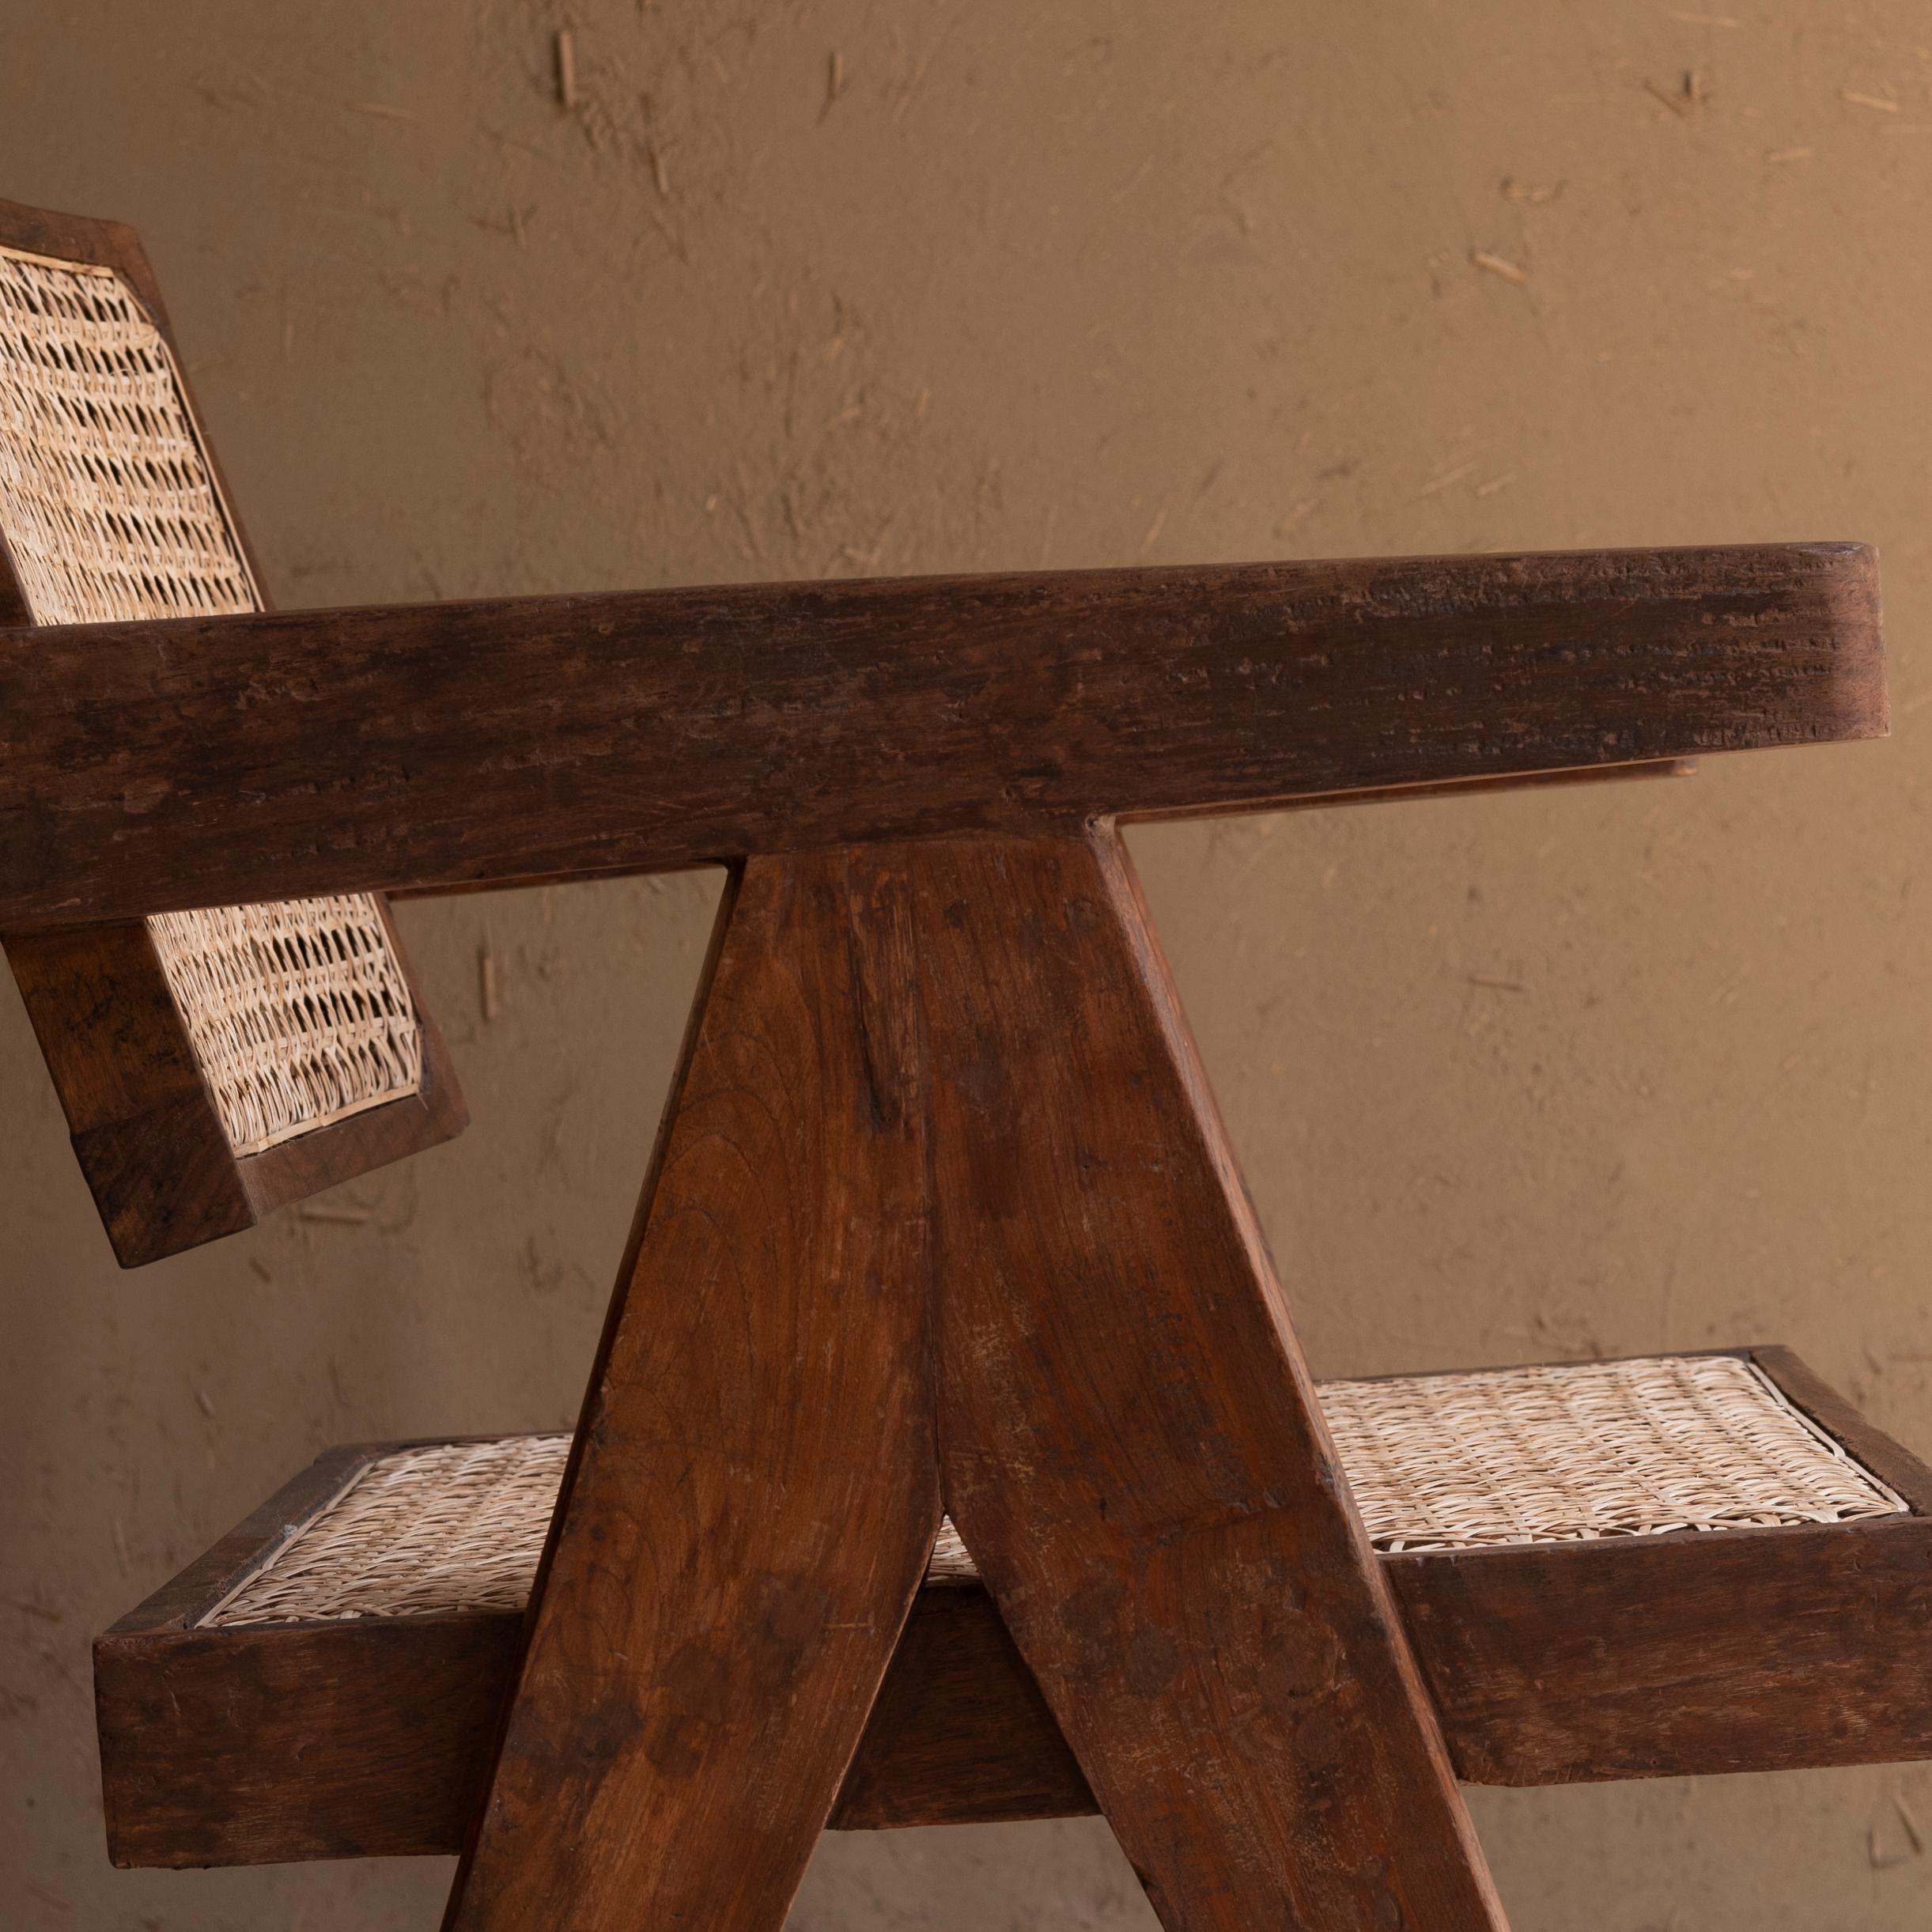 Pierre Jeanneret Office Chair, Circa 1955-56, Punjab Agricultural University For Sale 2